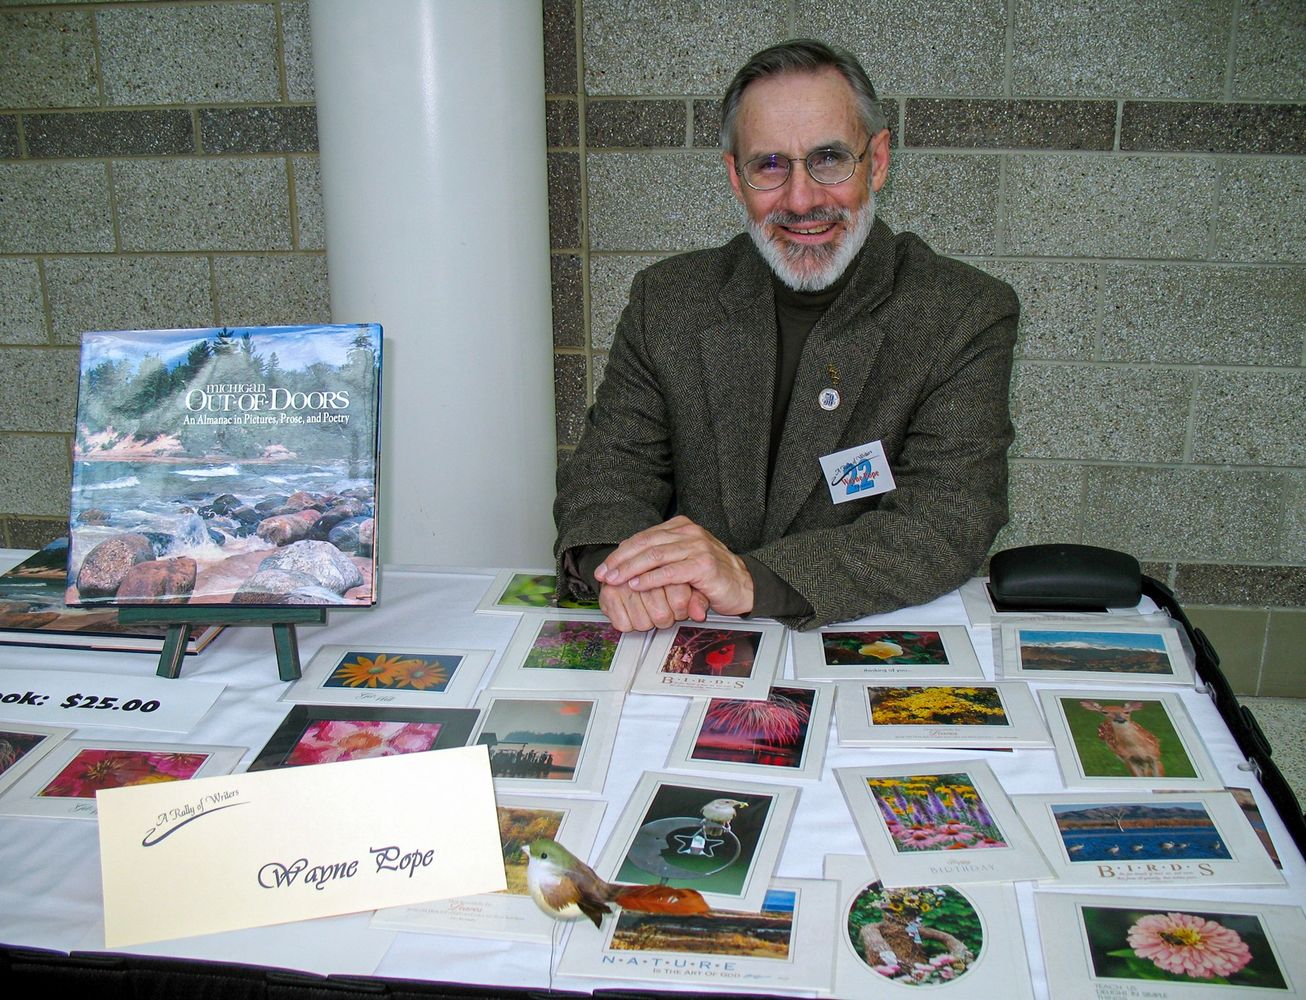 Wayne as guest speaker at "Rally of Writers" conference, Lansing, MI: "How Photos Sell Stories."